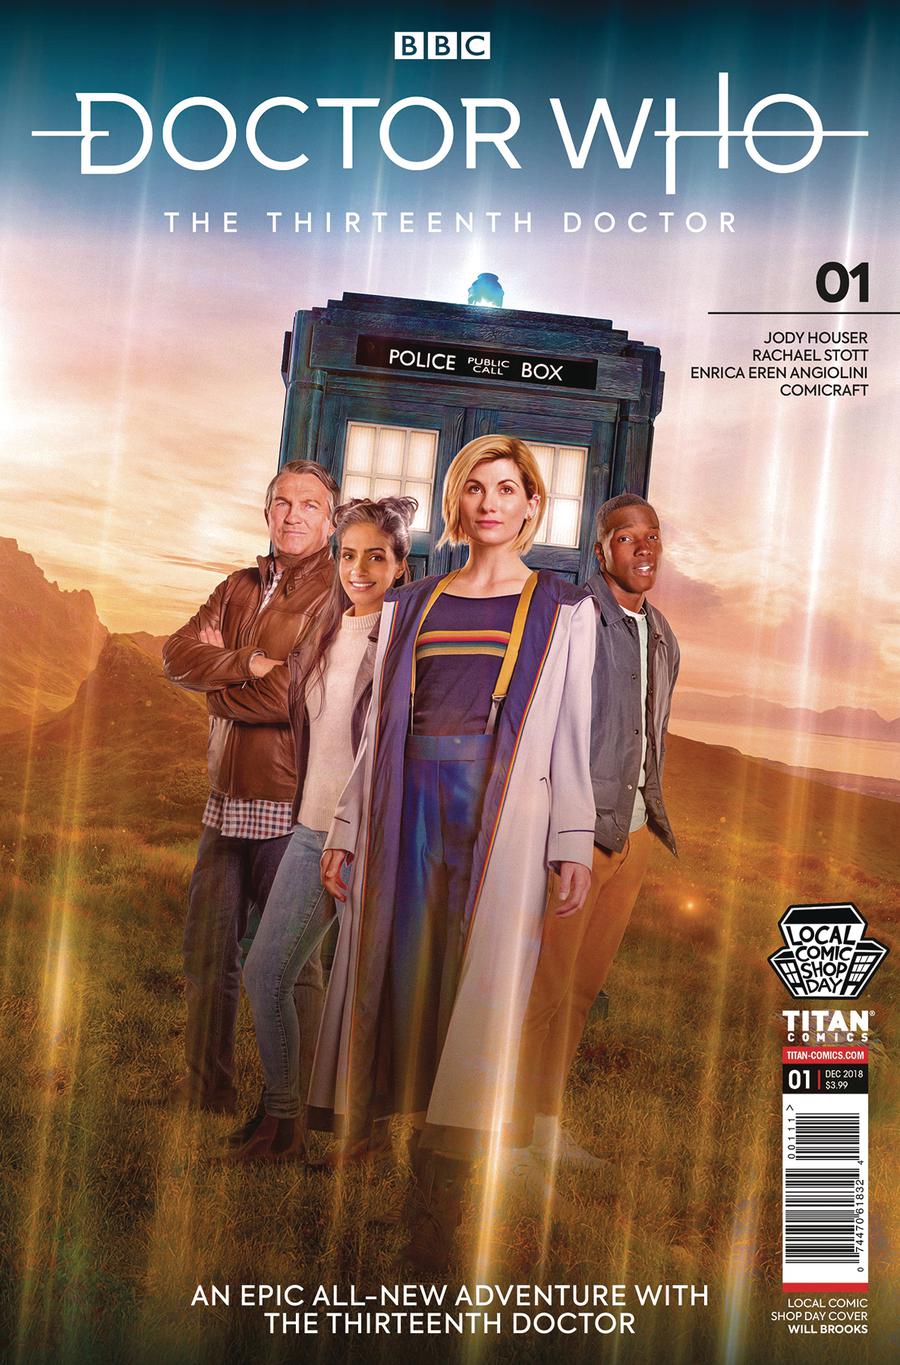 LCSD 2018 Doctor Who 13th Doctor #1 Set